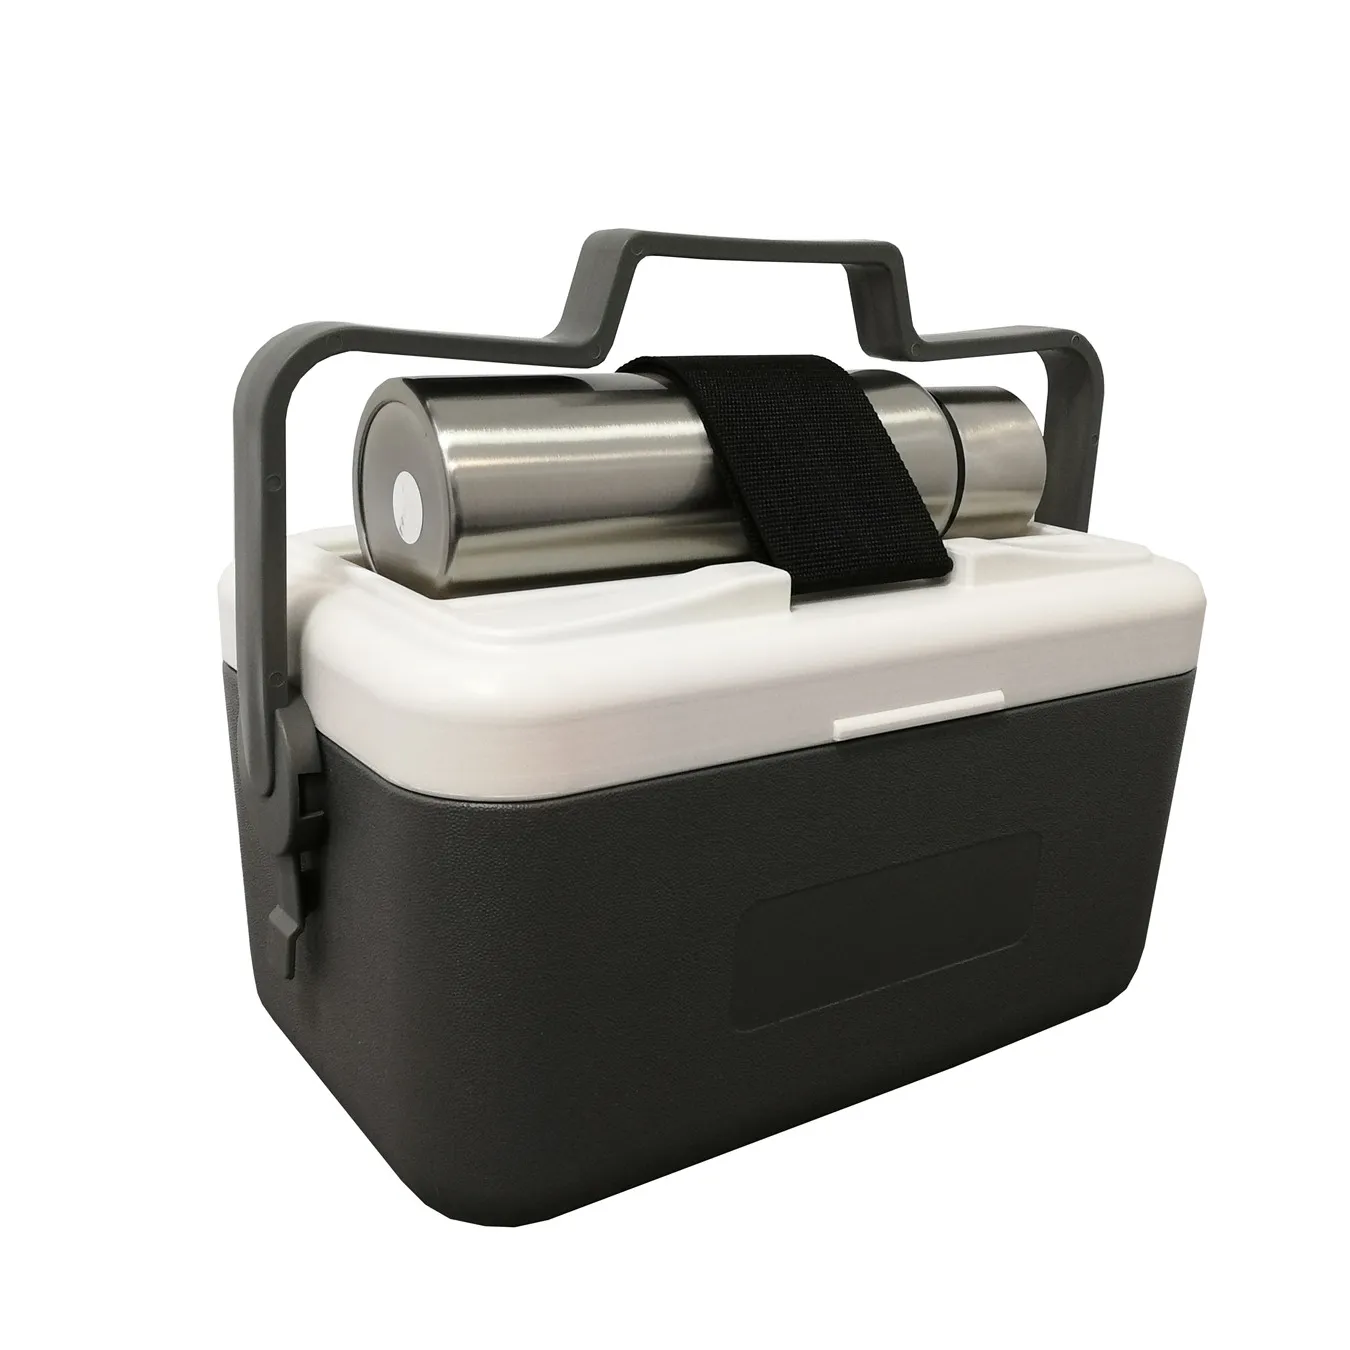 TR-Cooler Lunch Box With Thermos Flask Combos/Lunch Box Set,prefab houses cooler box combos